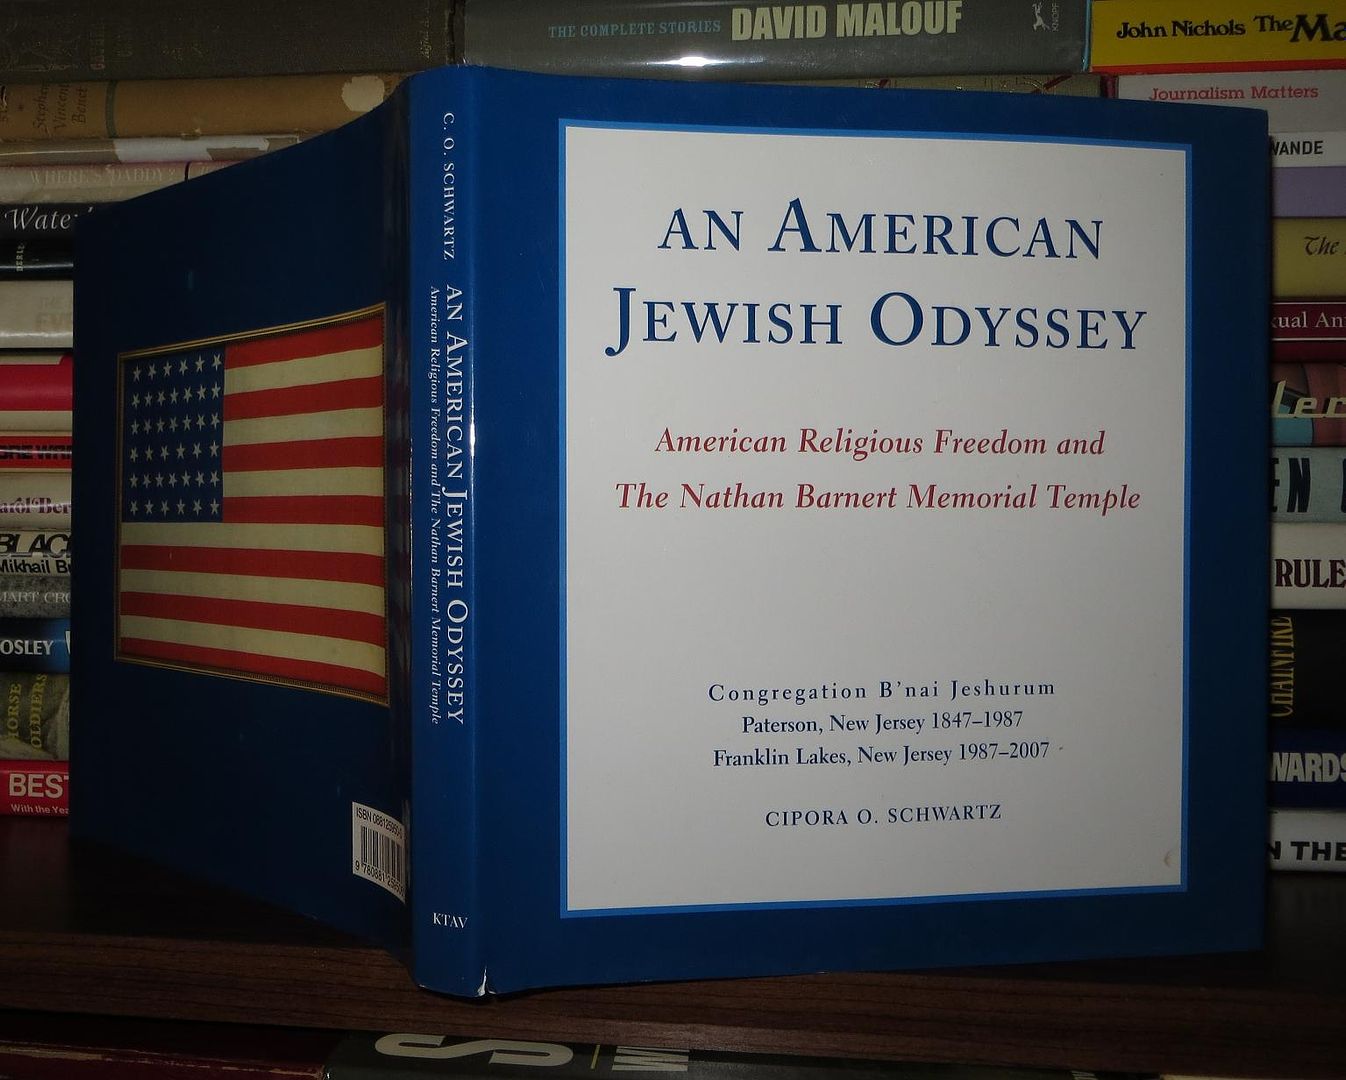 SCHWARTZ, CIPORA O. - An American Jewish Odyssey American Religious Freedoms and the Nathan Barnert Memorial Temple